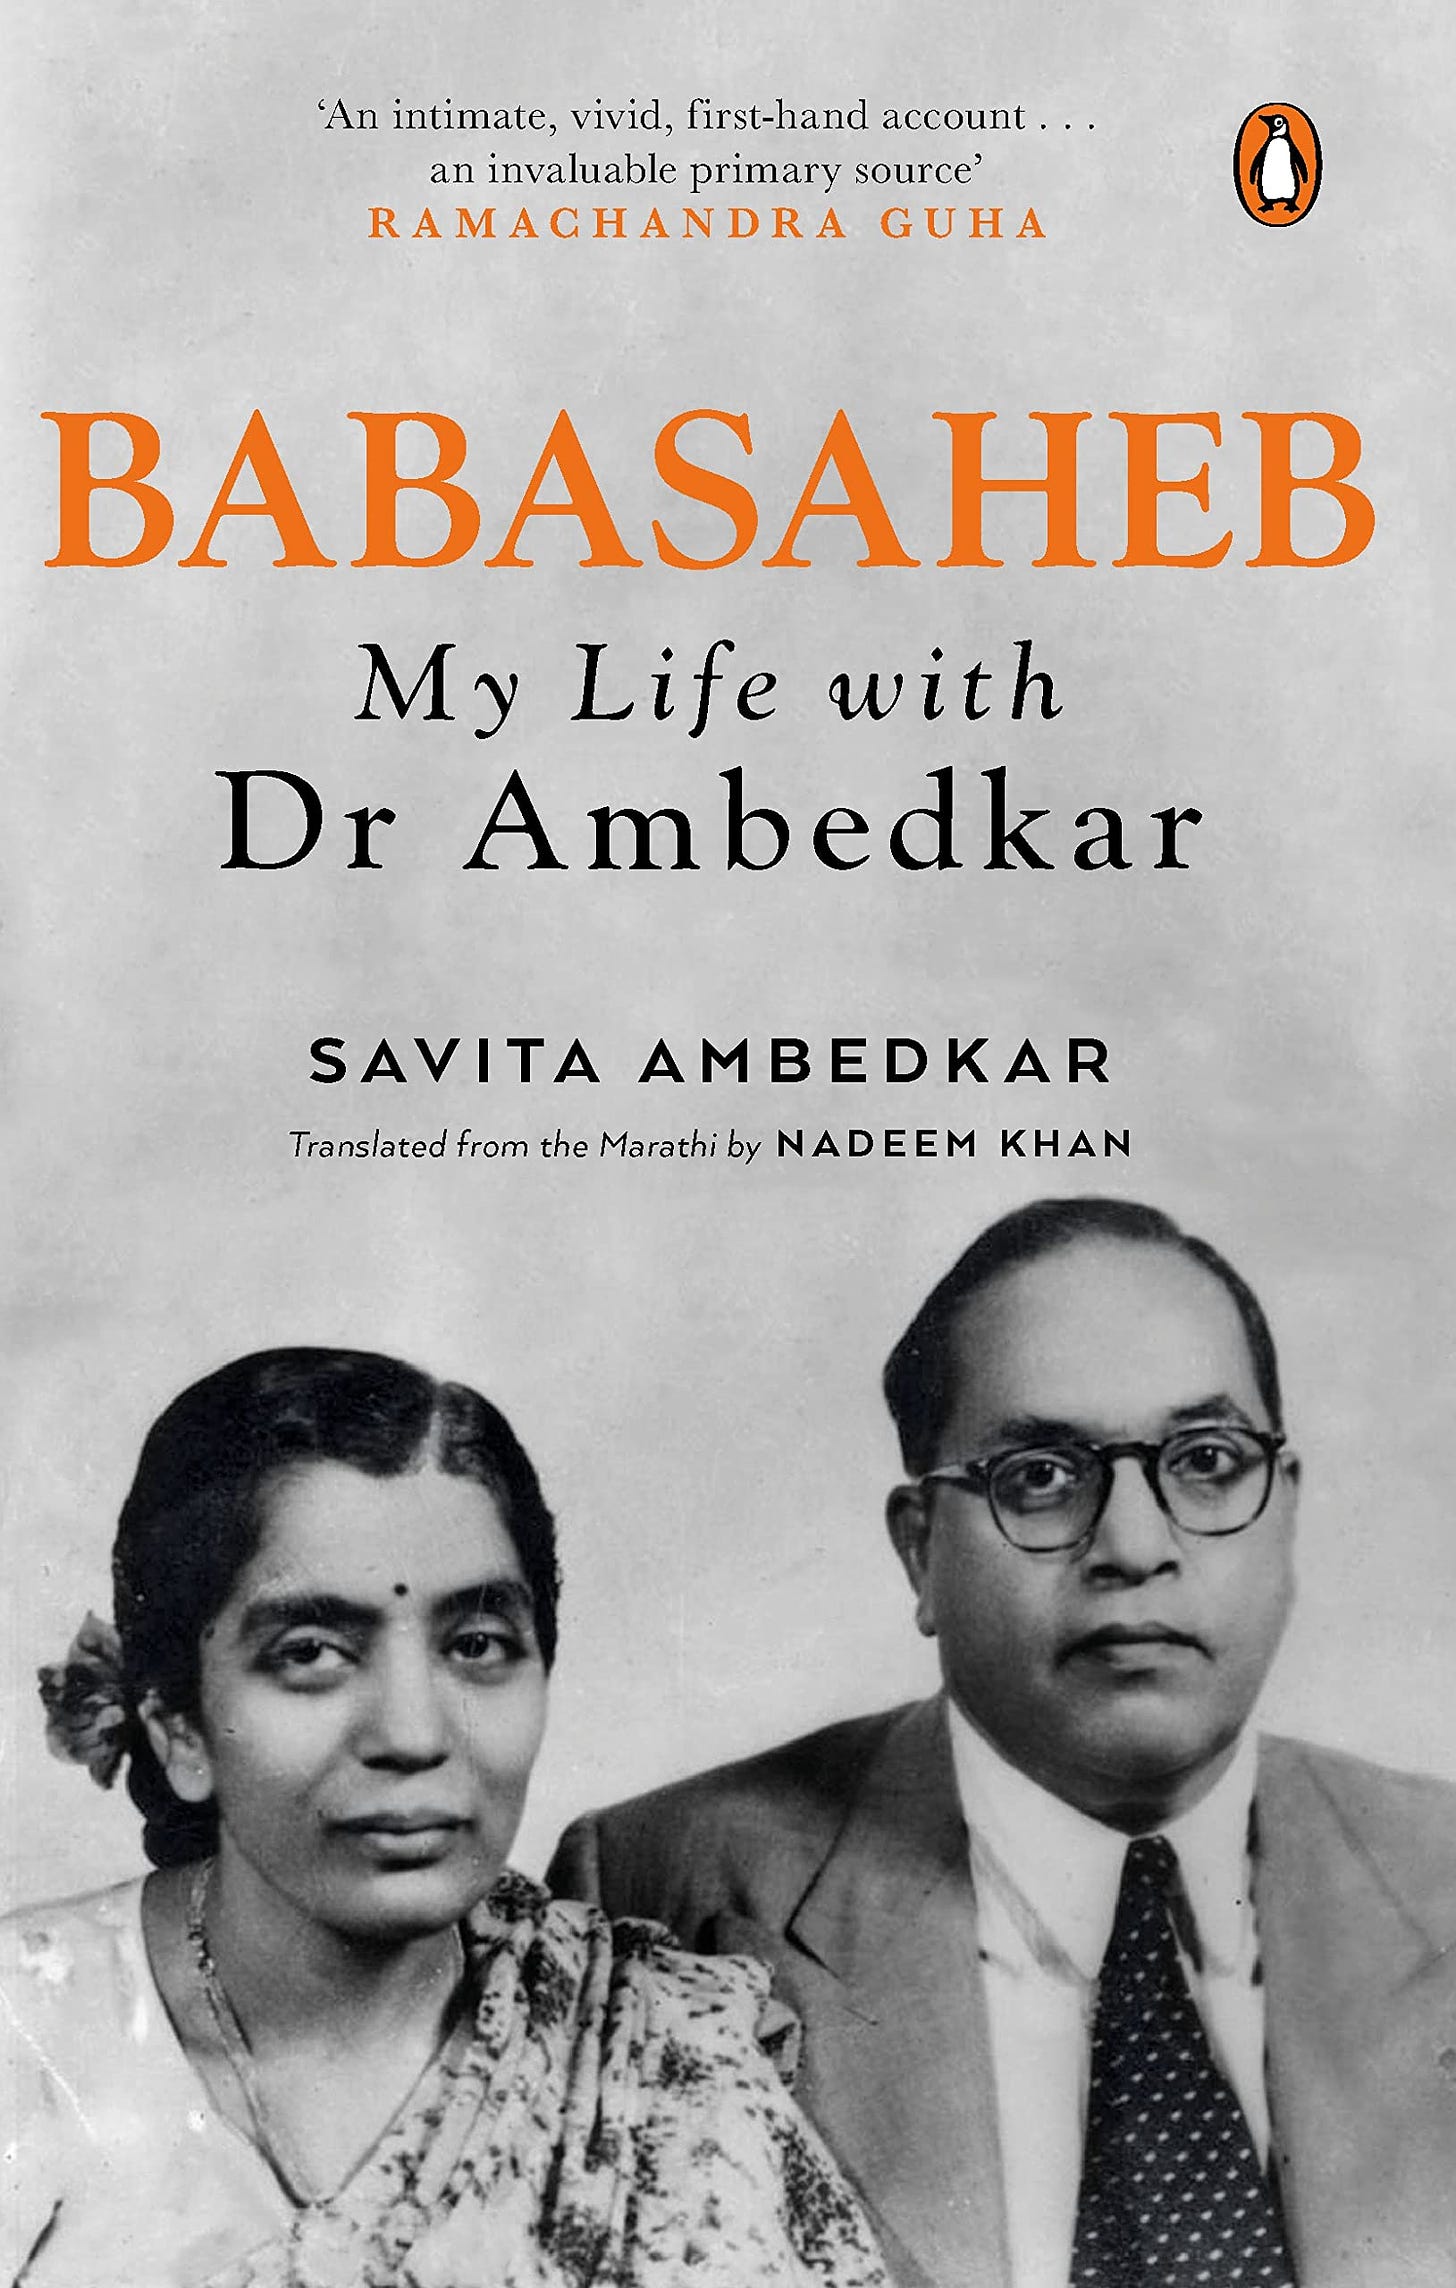 Buy Babasaheb: My Life With Dr Ambedkar Book Online at Low Prices in India  | Babasaheb: My Life With Dr Ambedkar Reviews & Ratings - Amazon.in